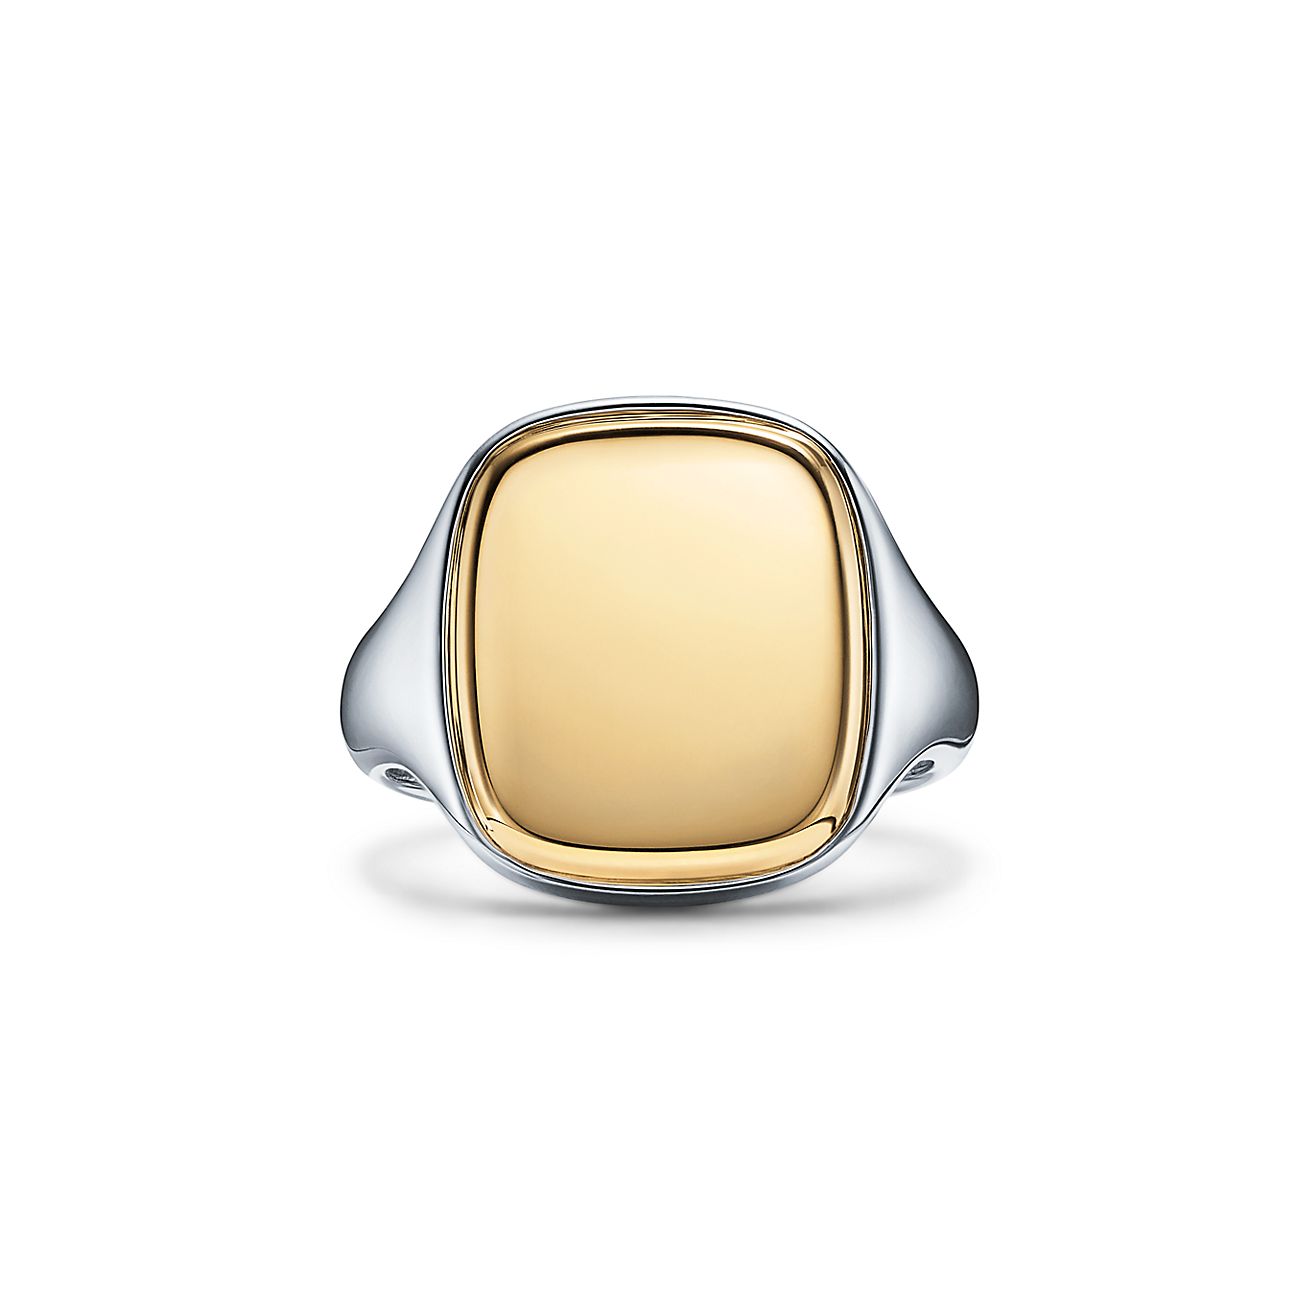 Tiffany 1837™ Makers signet ring in sterling silver, 12 mm wide